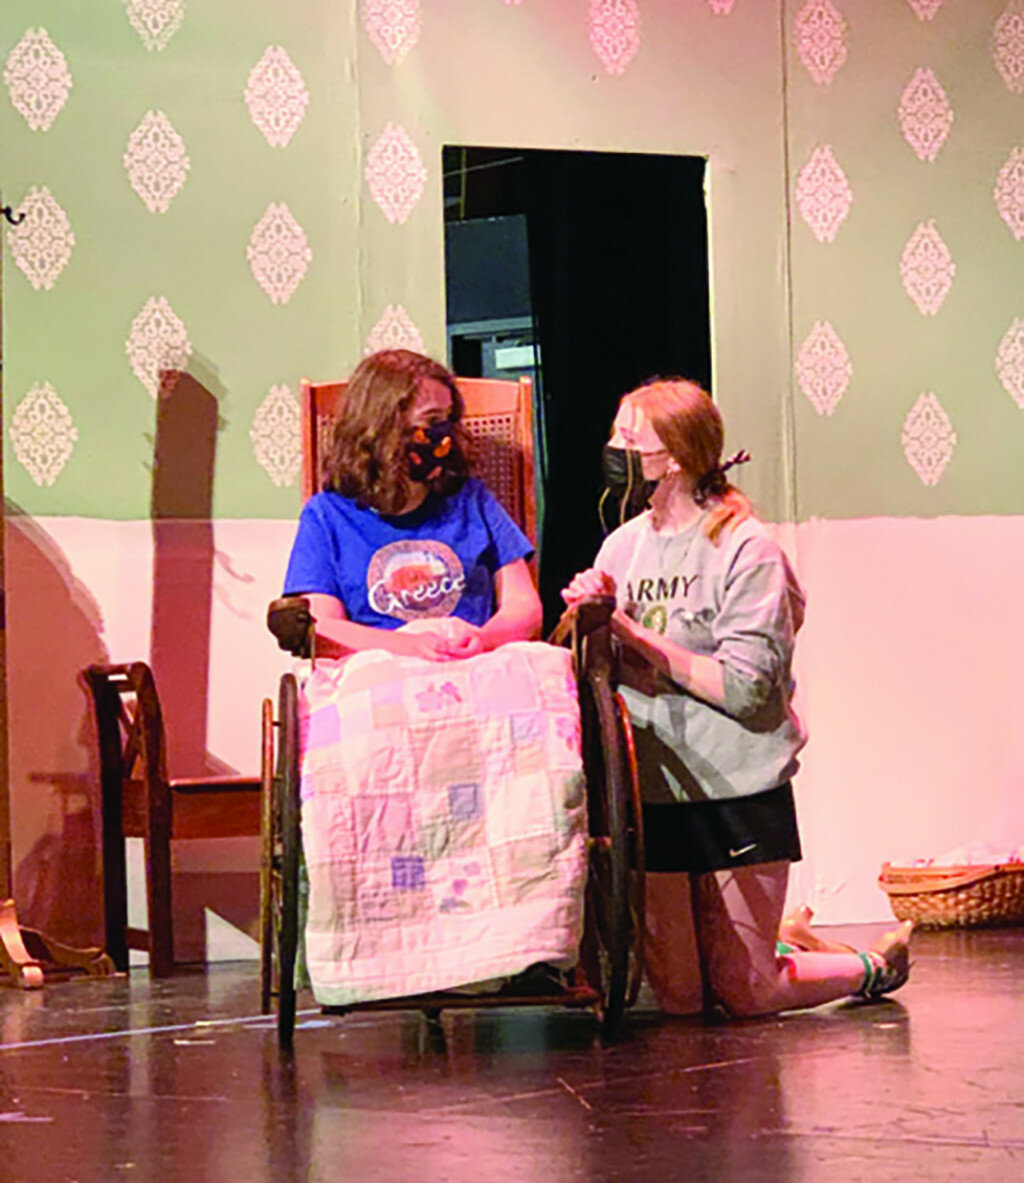 Students rehearse for the Mendota High School Fall play, "Little Women," to be presented Oct. 23-24.